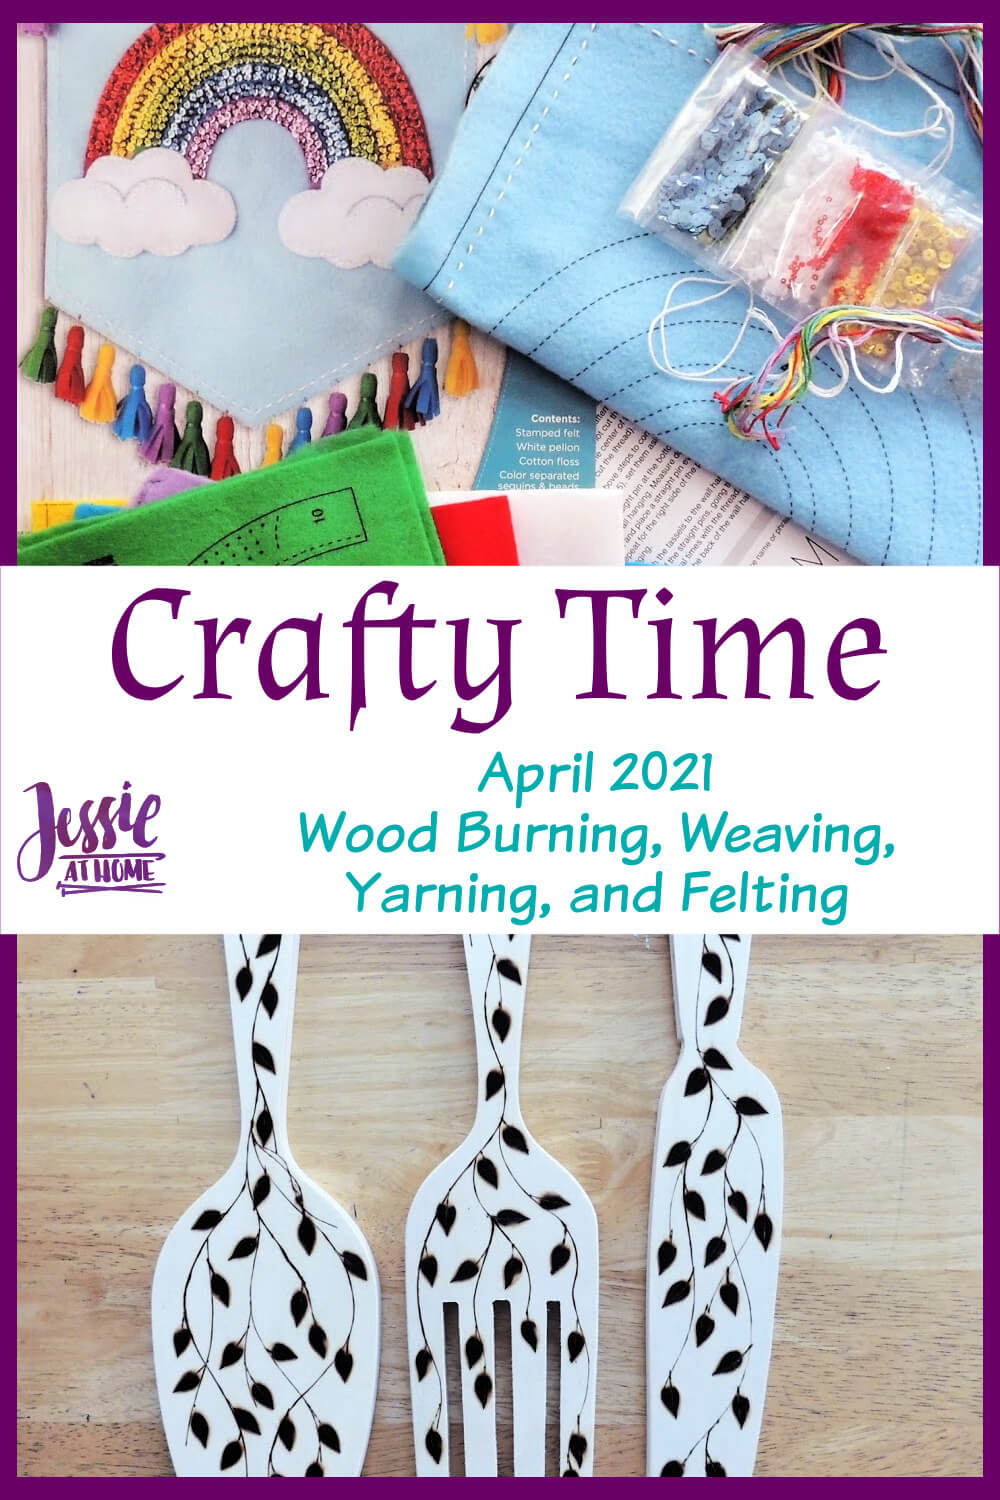 Wood Burning, Weaving, Yarning, and Felting - April 2021 Crafty Time with Jessie